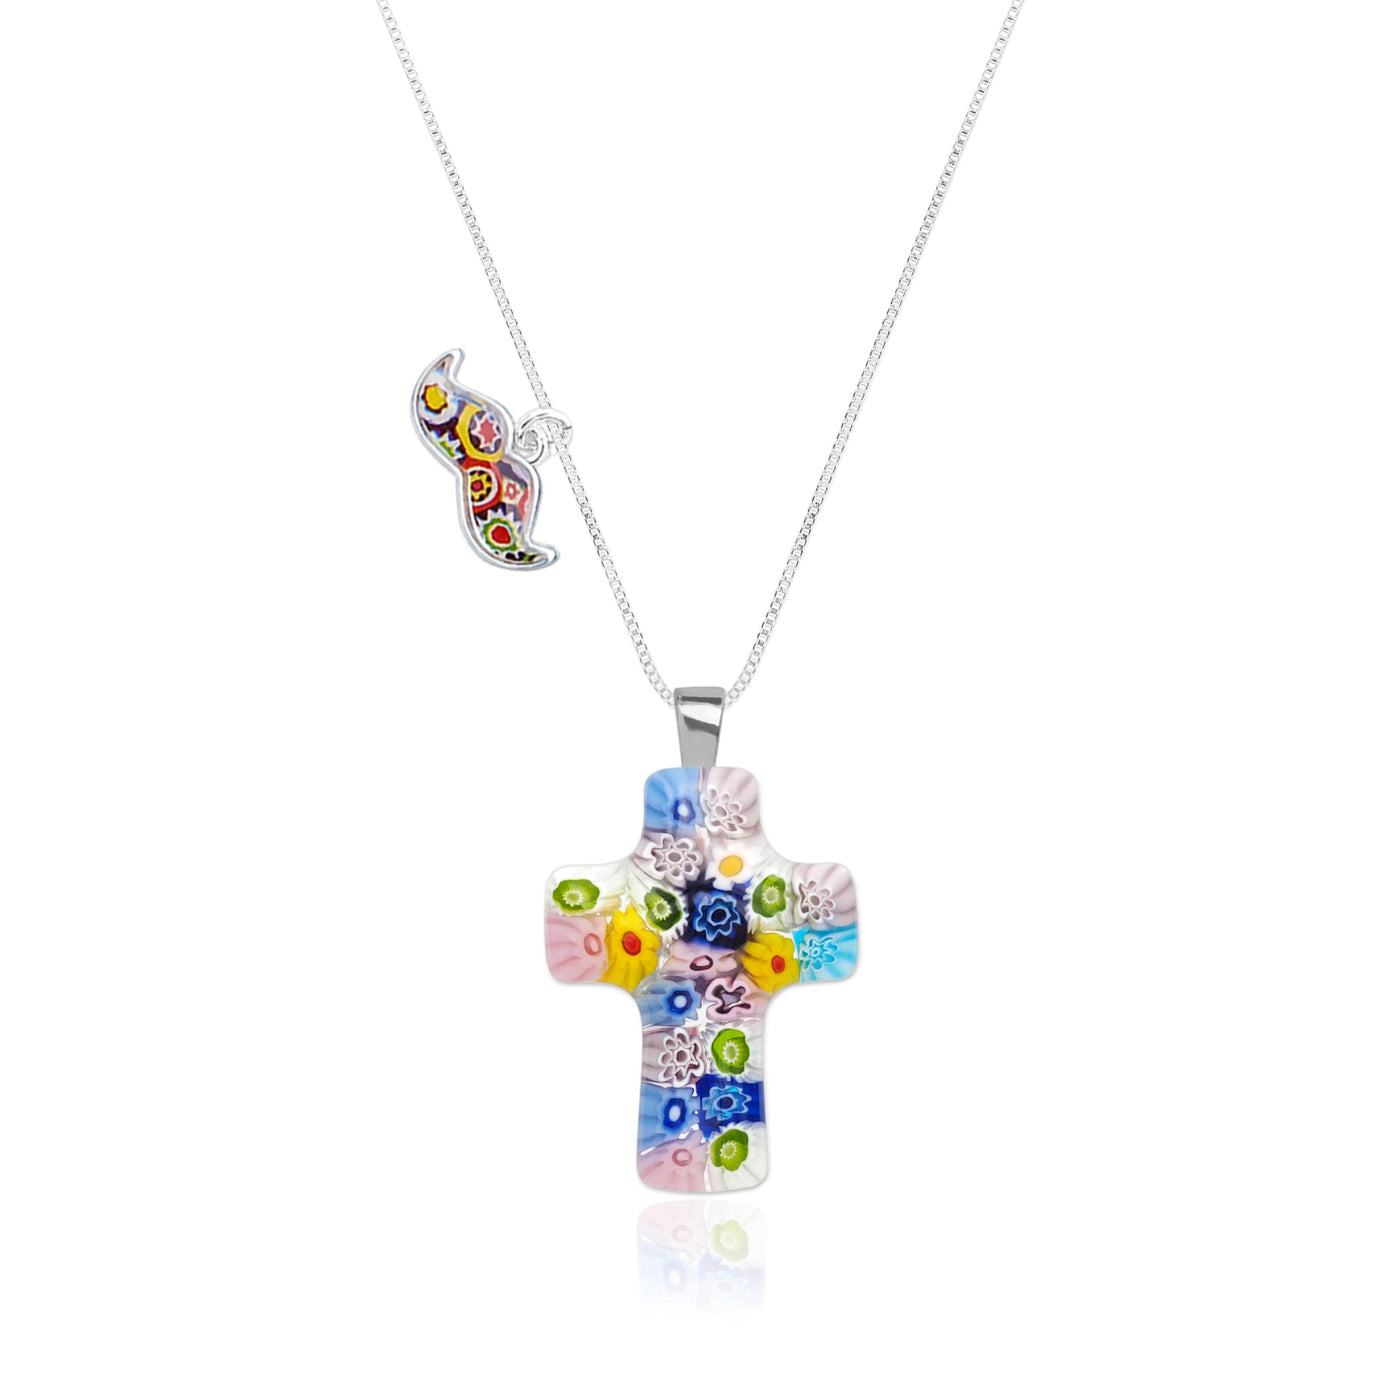 Cross in Bloom Necklace with Micro-Floral - 0.85mm 925 Sterling Silver - Pendant Necklace